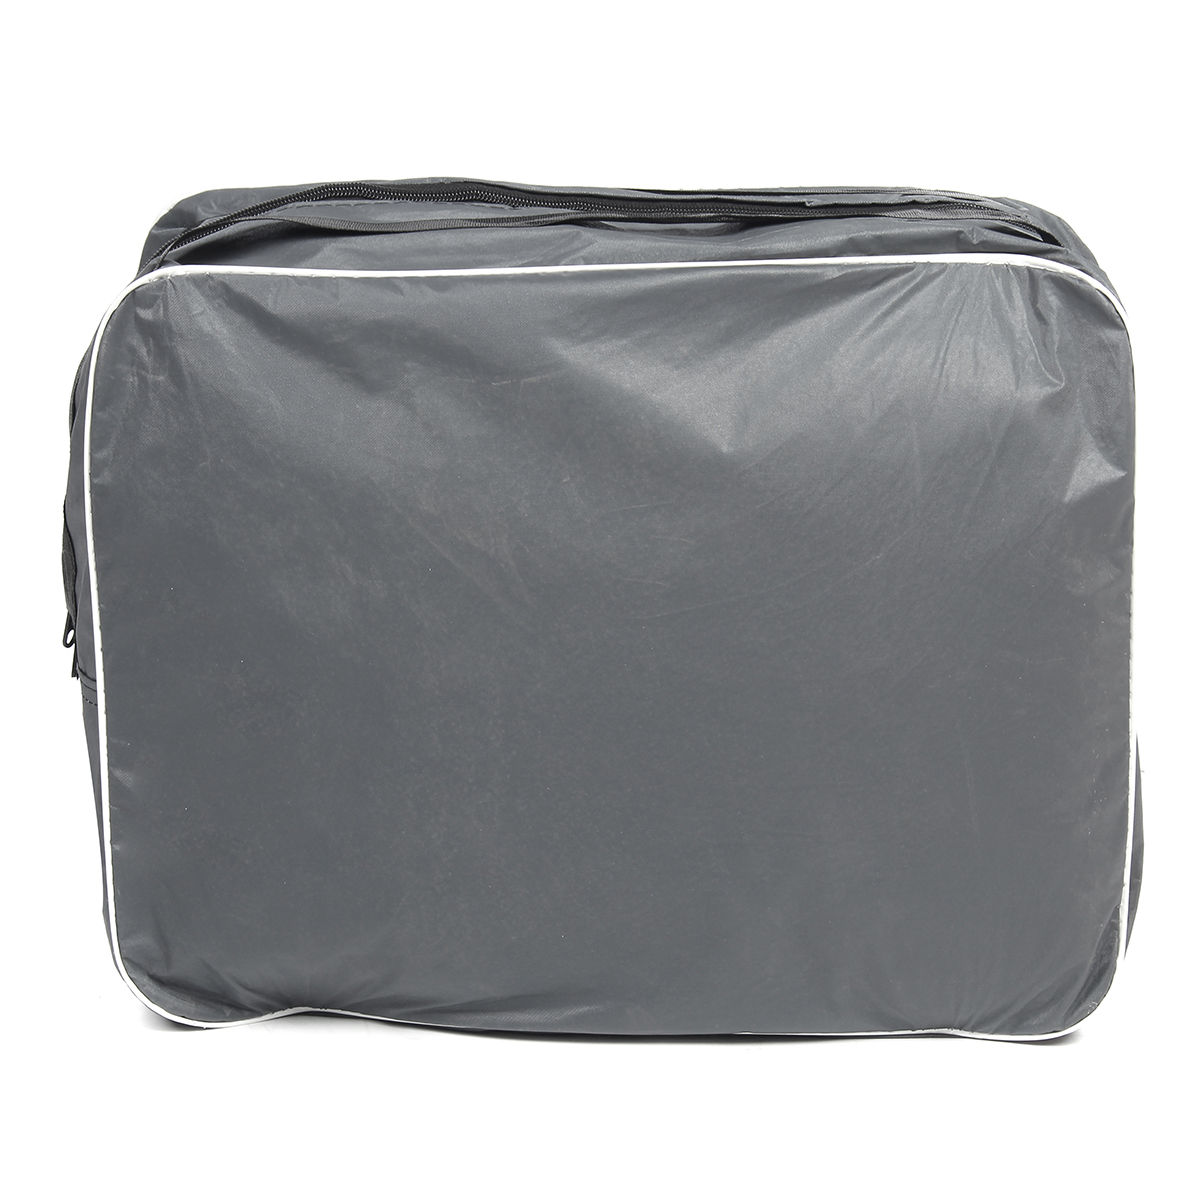 490Cm XL 2-Layer Sedan Full Car Cover Waterproof Dustproof Rainproof and Cotton Jersey with 6 Reflective Strips